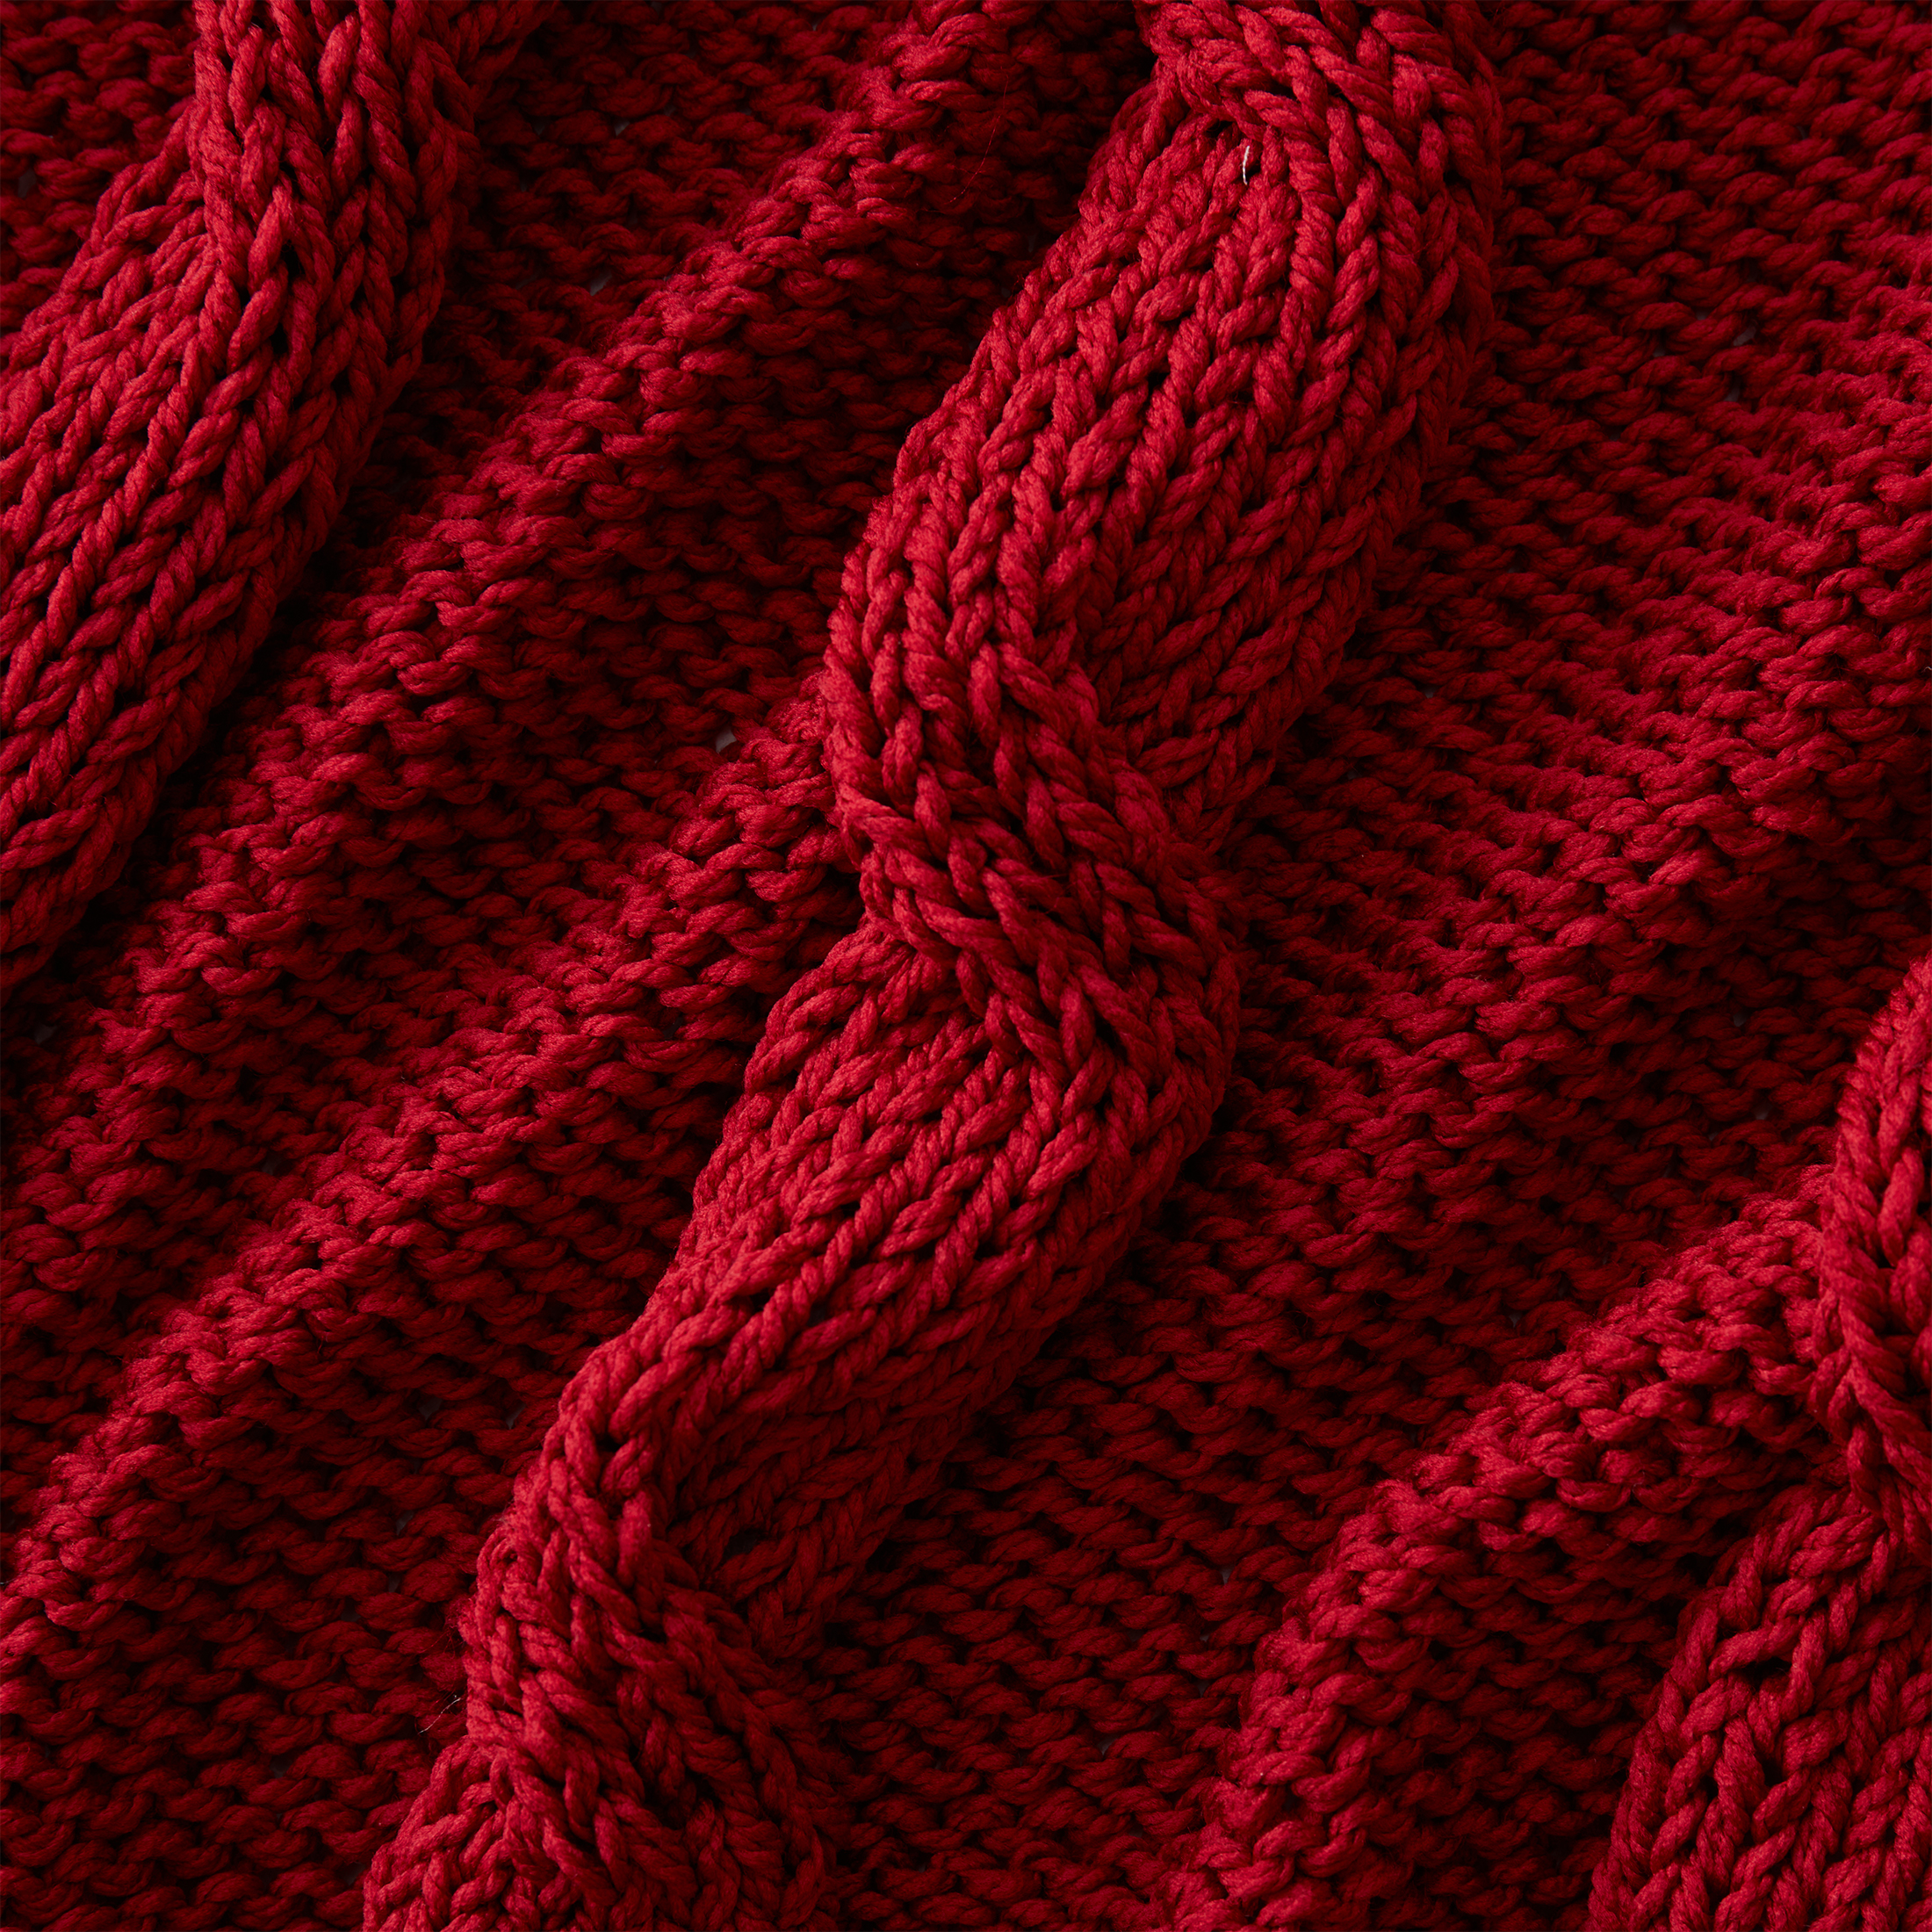 My Texas House Willow Cable Knit Cotton Throw Blanket, Red, Standard Throw - image 2 of 5